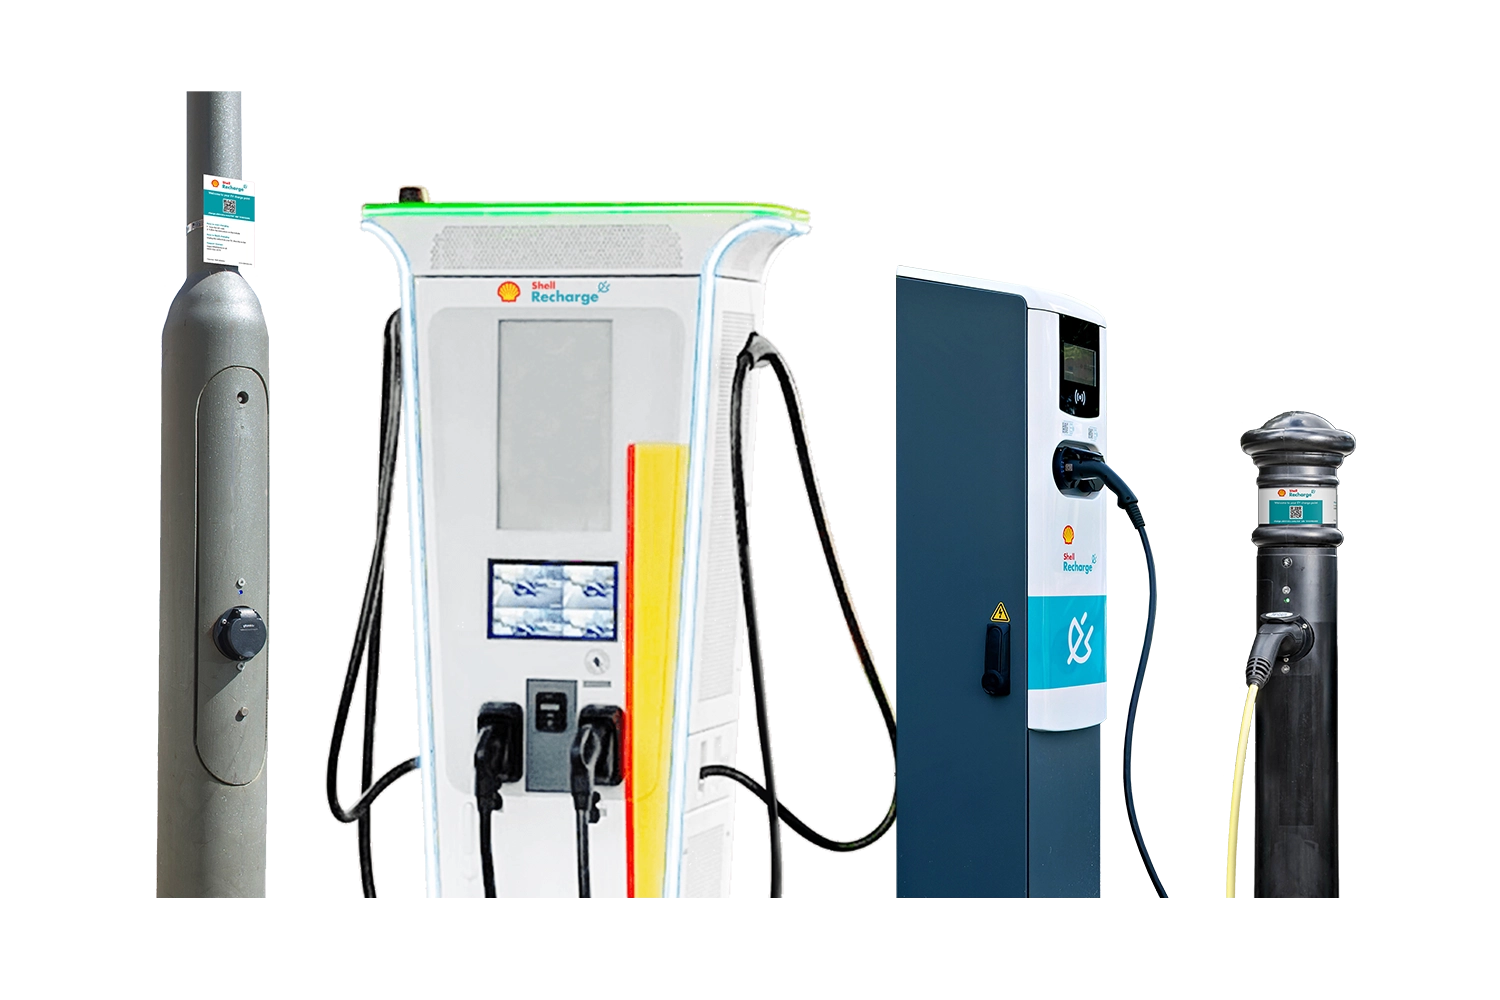 ubitricity prodcut portfolio of Shell Recharge branded public charging solutions with EV lamppost charge points, fast charger sand bollard charging stations.